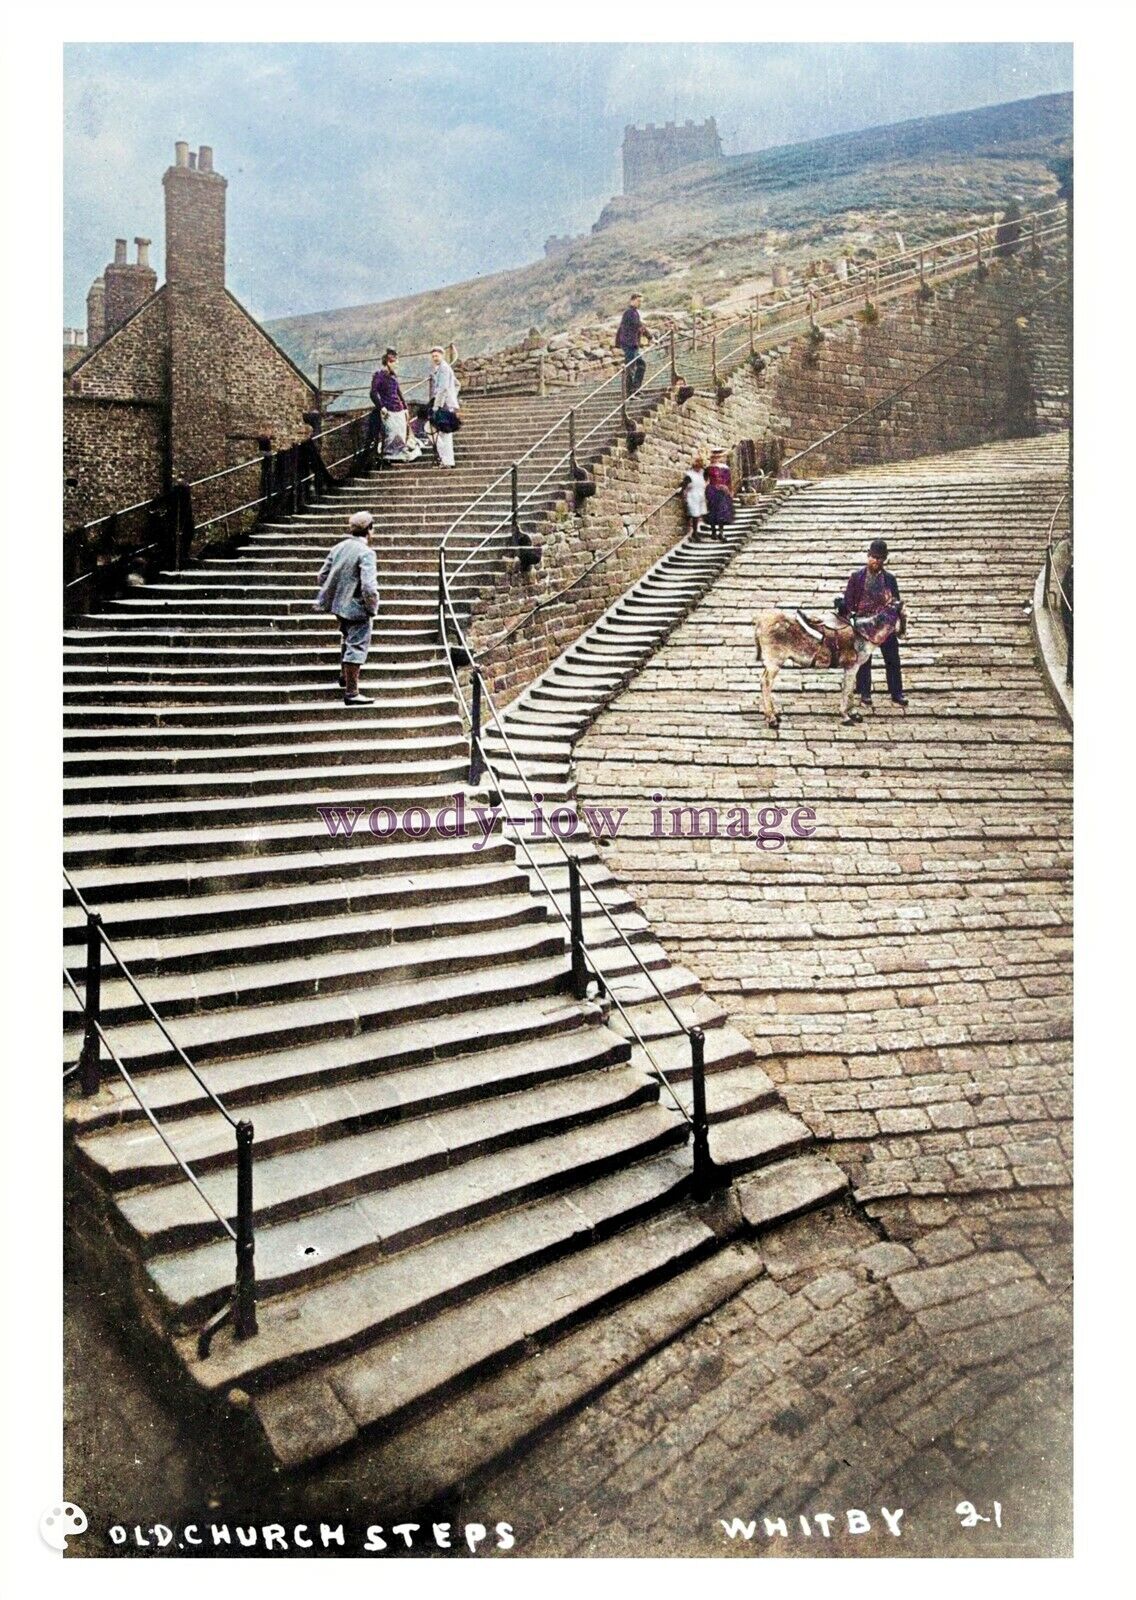 ptc4604 - Yorks. - View of the very Old Church Steps in Whitby c1904 - print 6x4